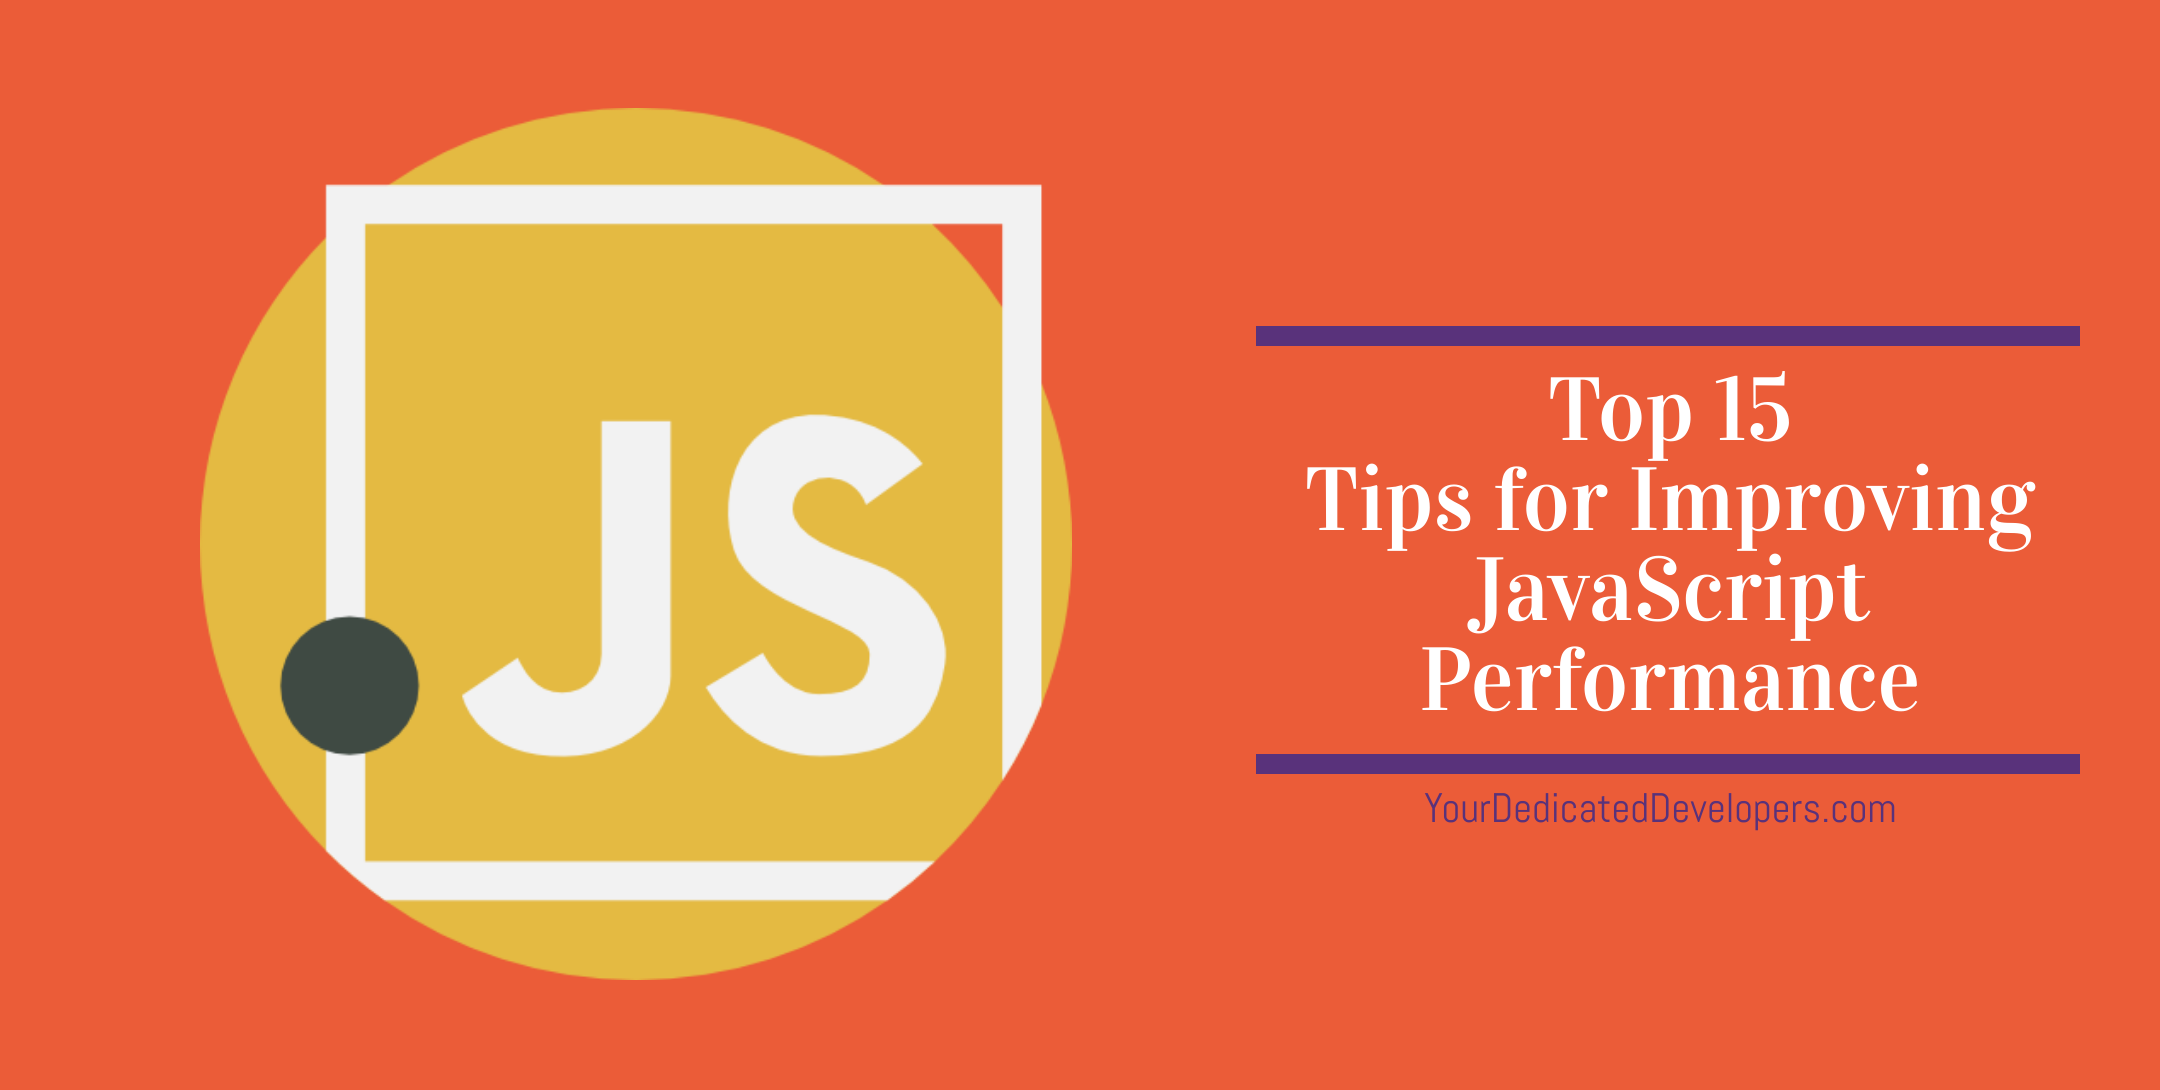 Top 15 Tips for Improving JavaScript Performance